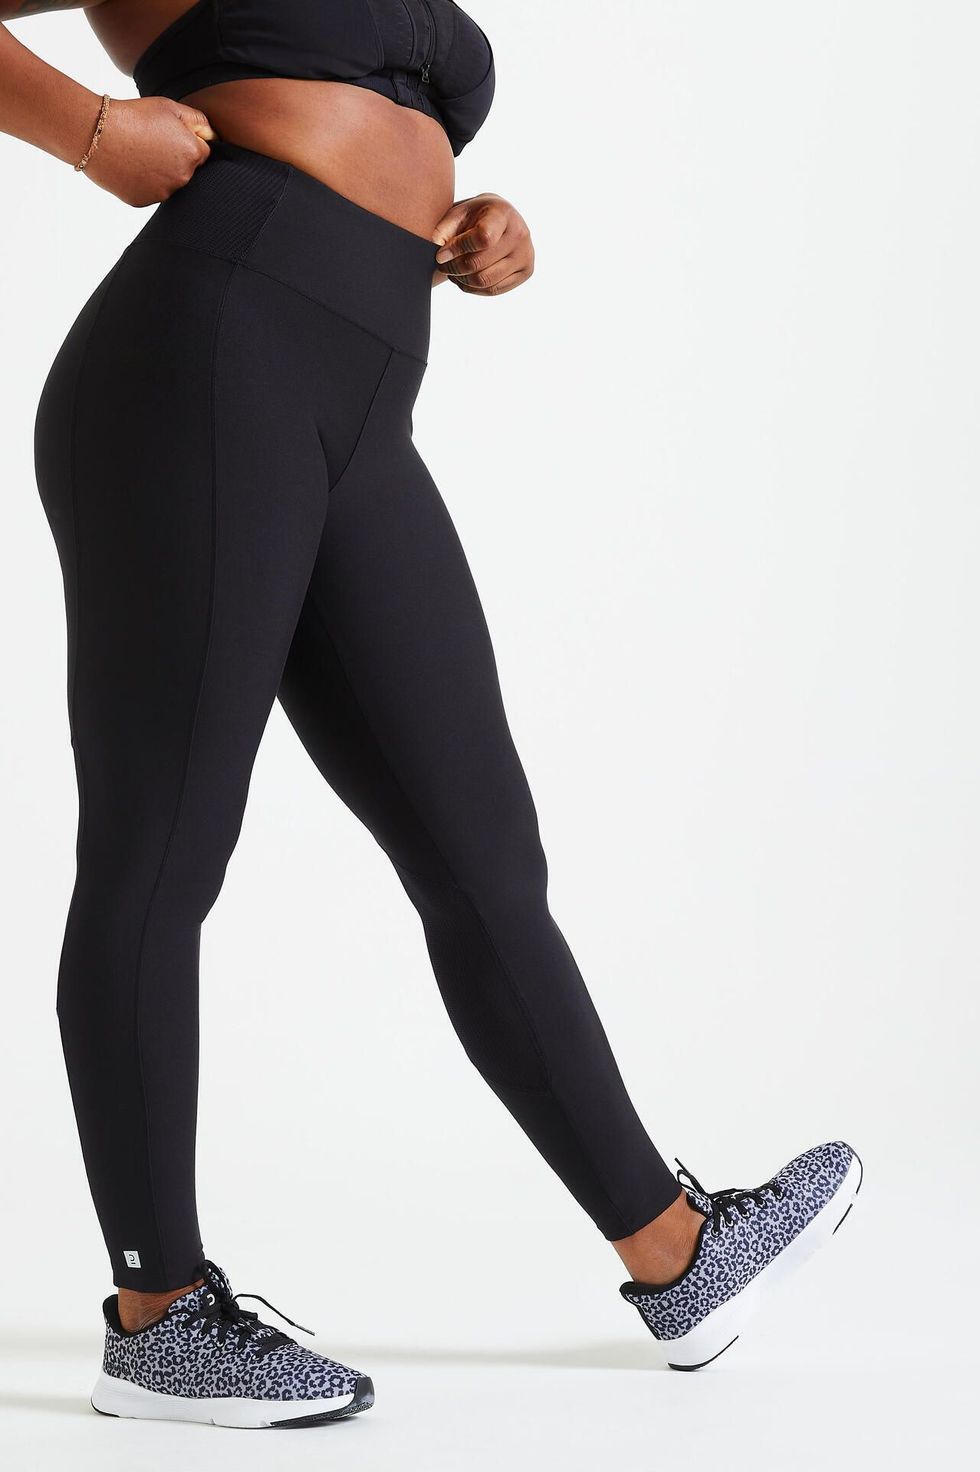 Women's High Waist Workout Yoga Leggings with Pockets Athletic